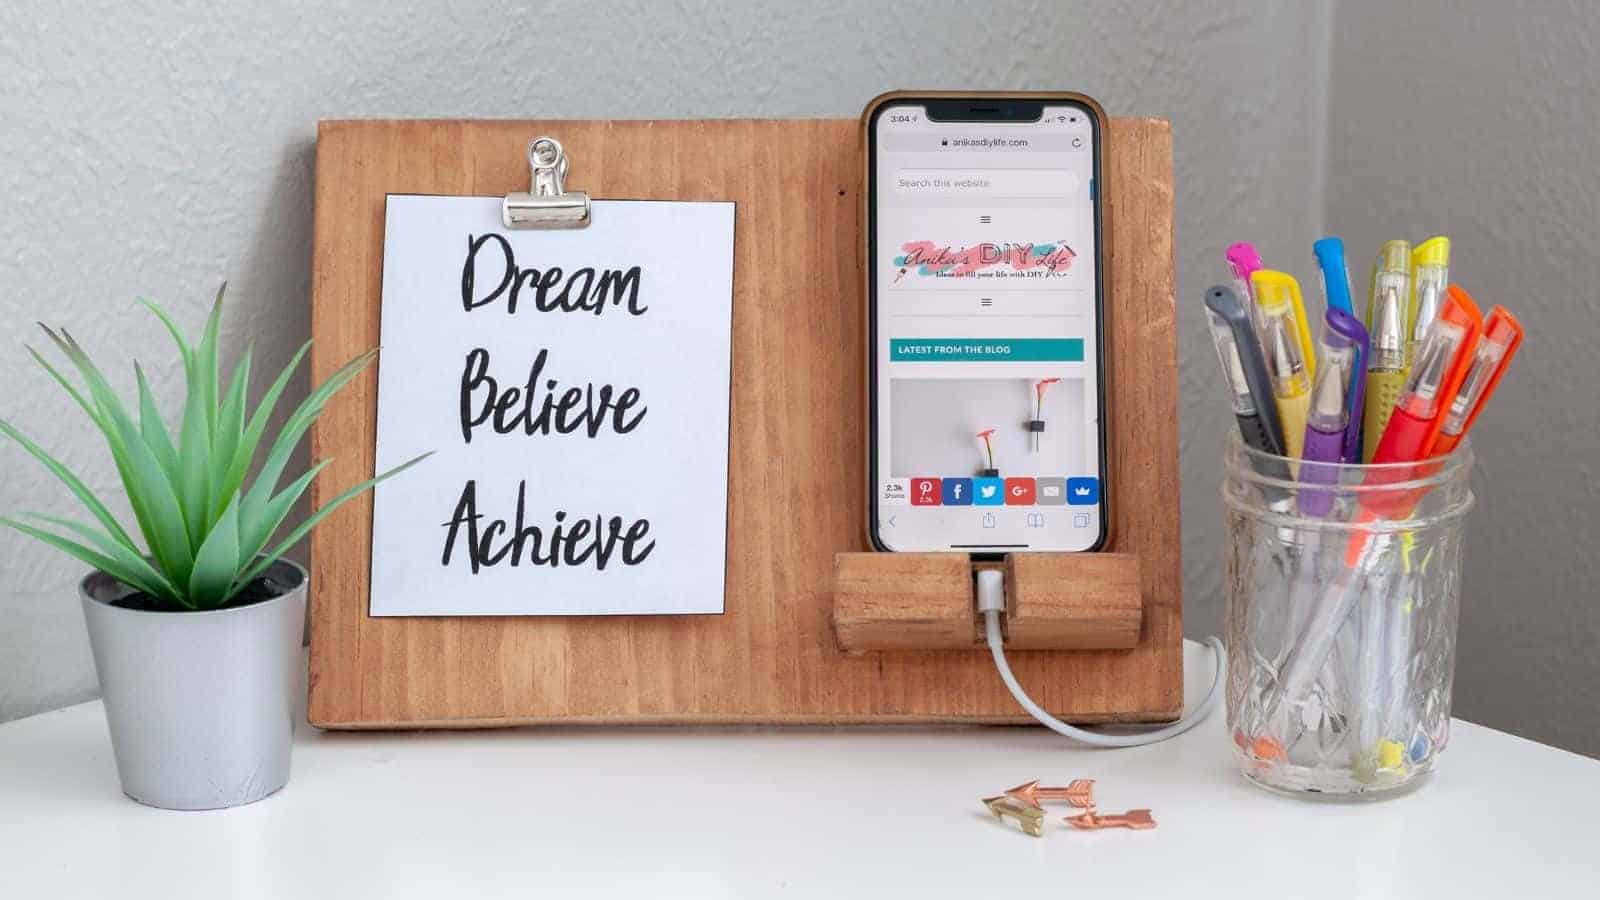 <p>If you have scrap wood, you can make this DIY phone stand. There’s a place for your favorite inspirational quote or photo, and it makes the perfect desk accessory. Make one for yourself or give it as a gift. <a href="https://www.anikasdiylife.com/diy-phone-holder-photo-display/">Learn how to build this project here.</a></p>